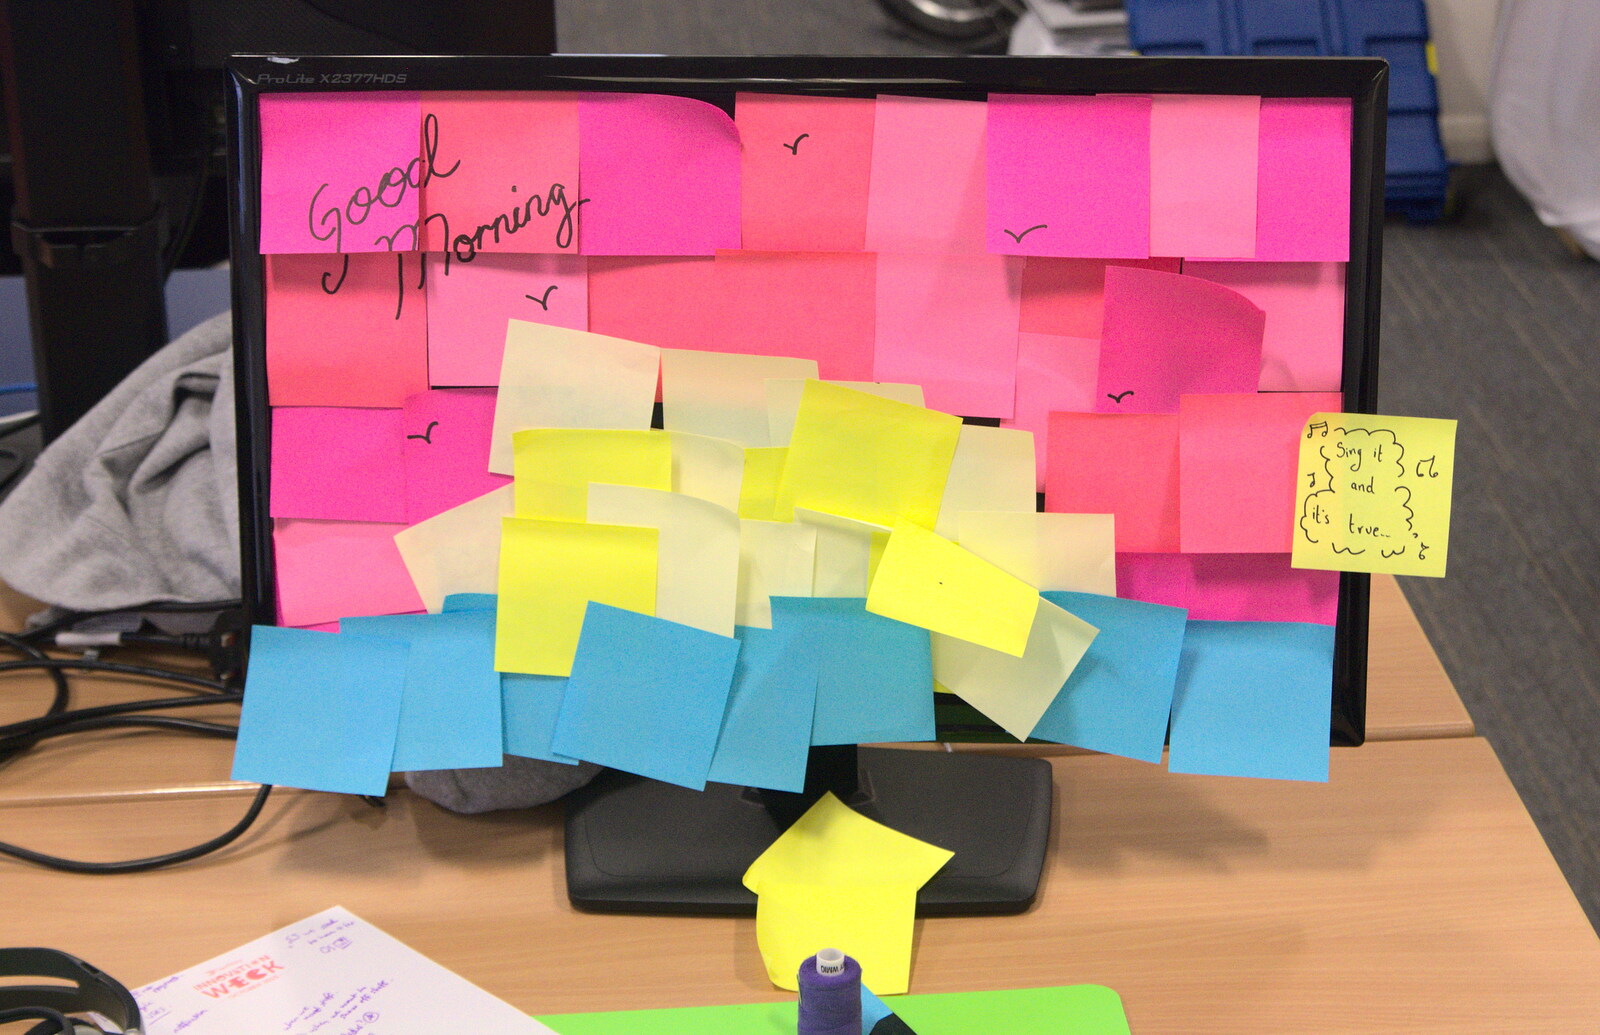 A monitor at work is covered in Post-it notes from Abbey Gardens in Autumn, Bury St. Edmunds, Suffolk - 27th October 2015